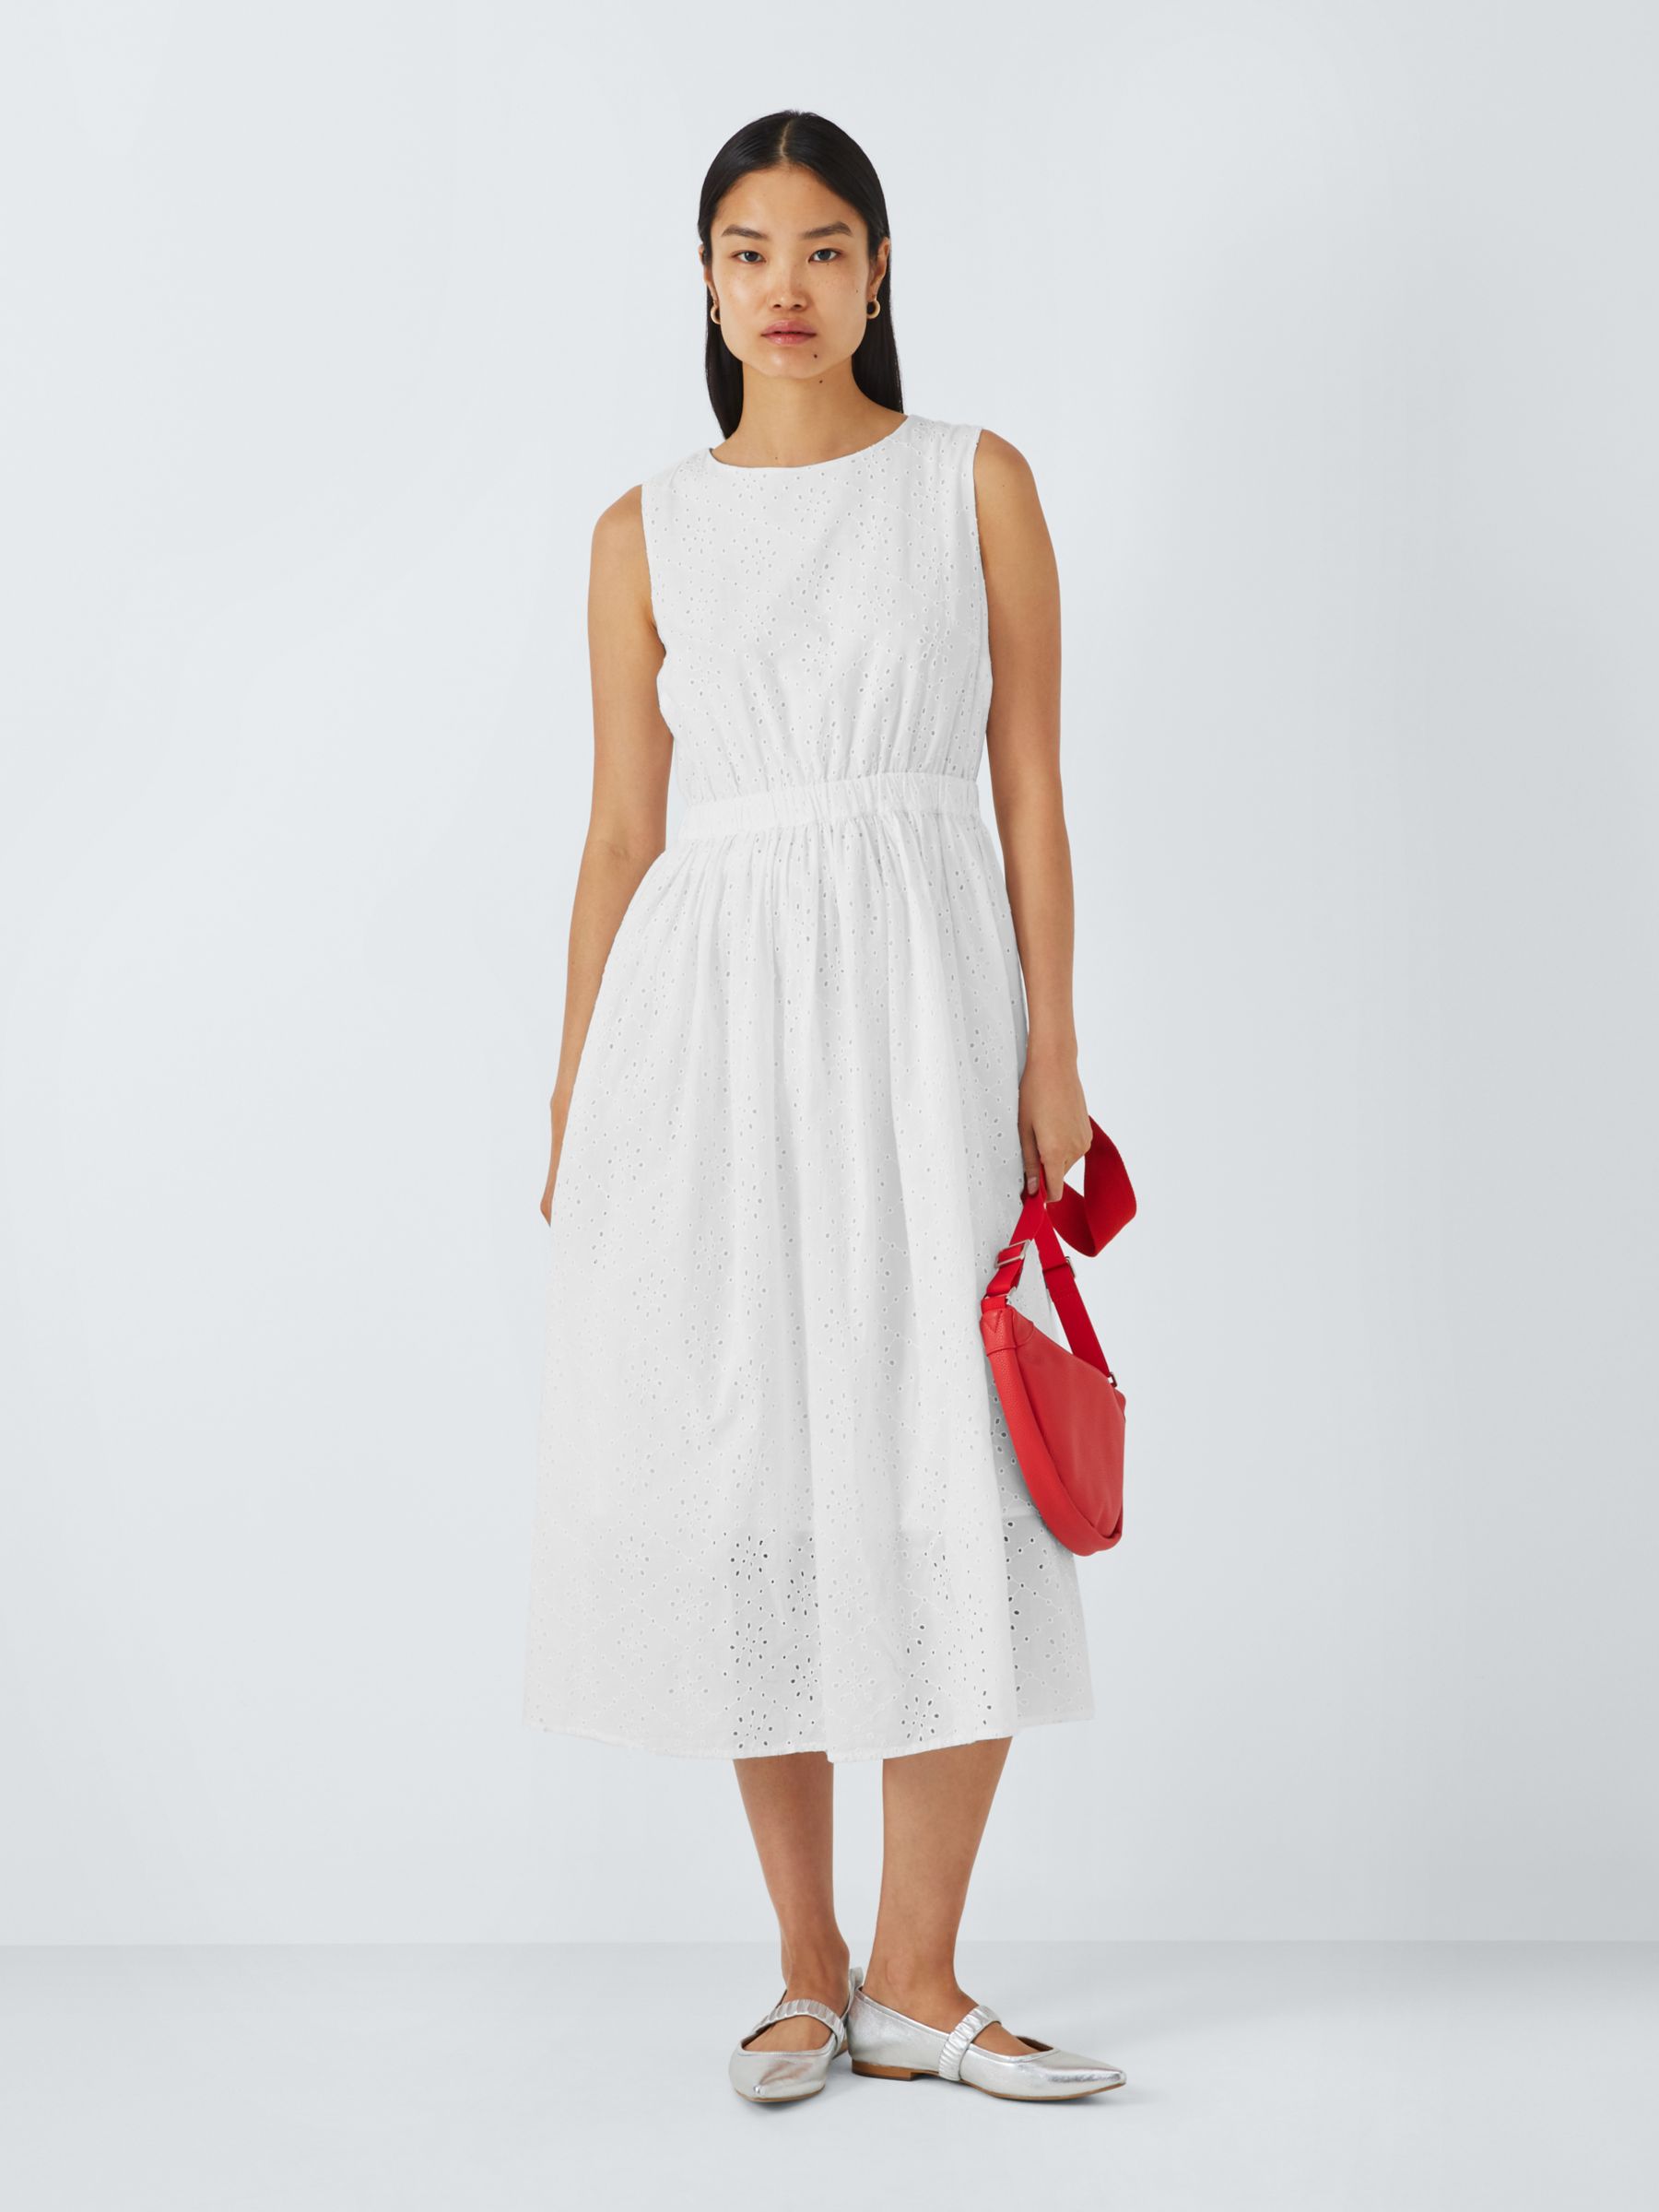 John Lewis ANYDAY Broderie Dress, White, 6